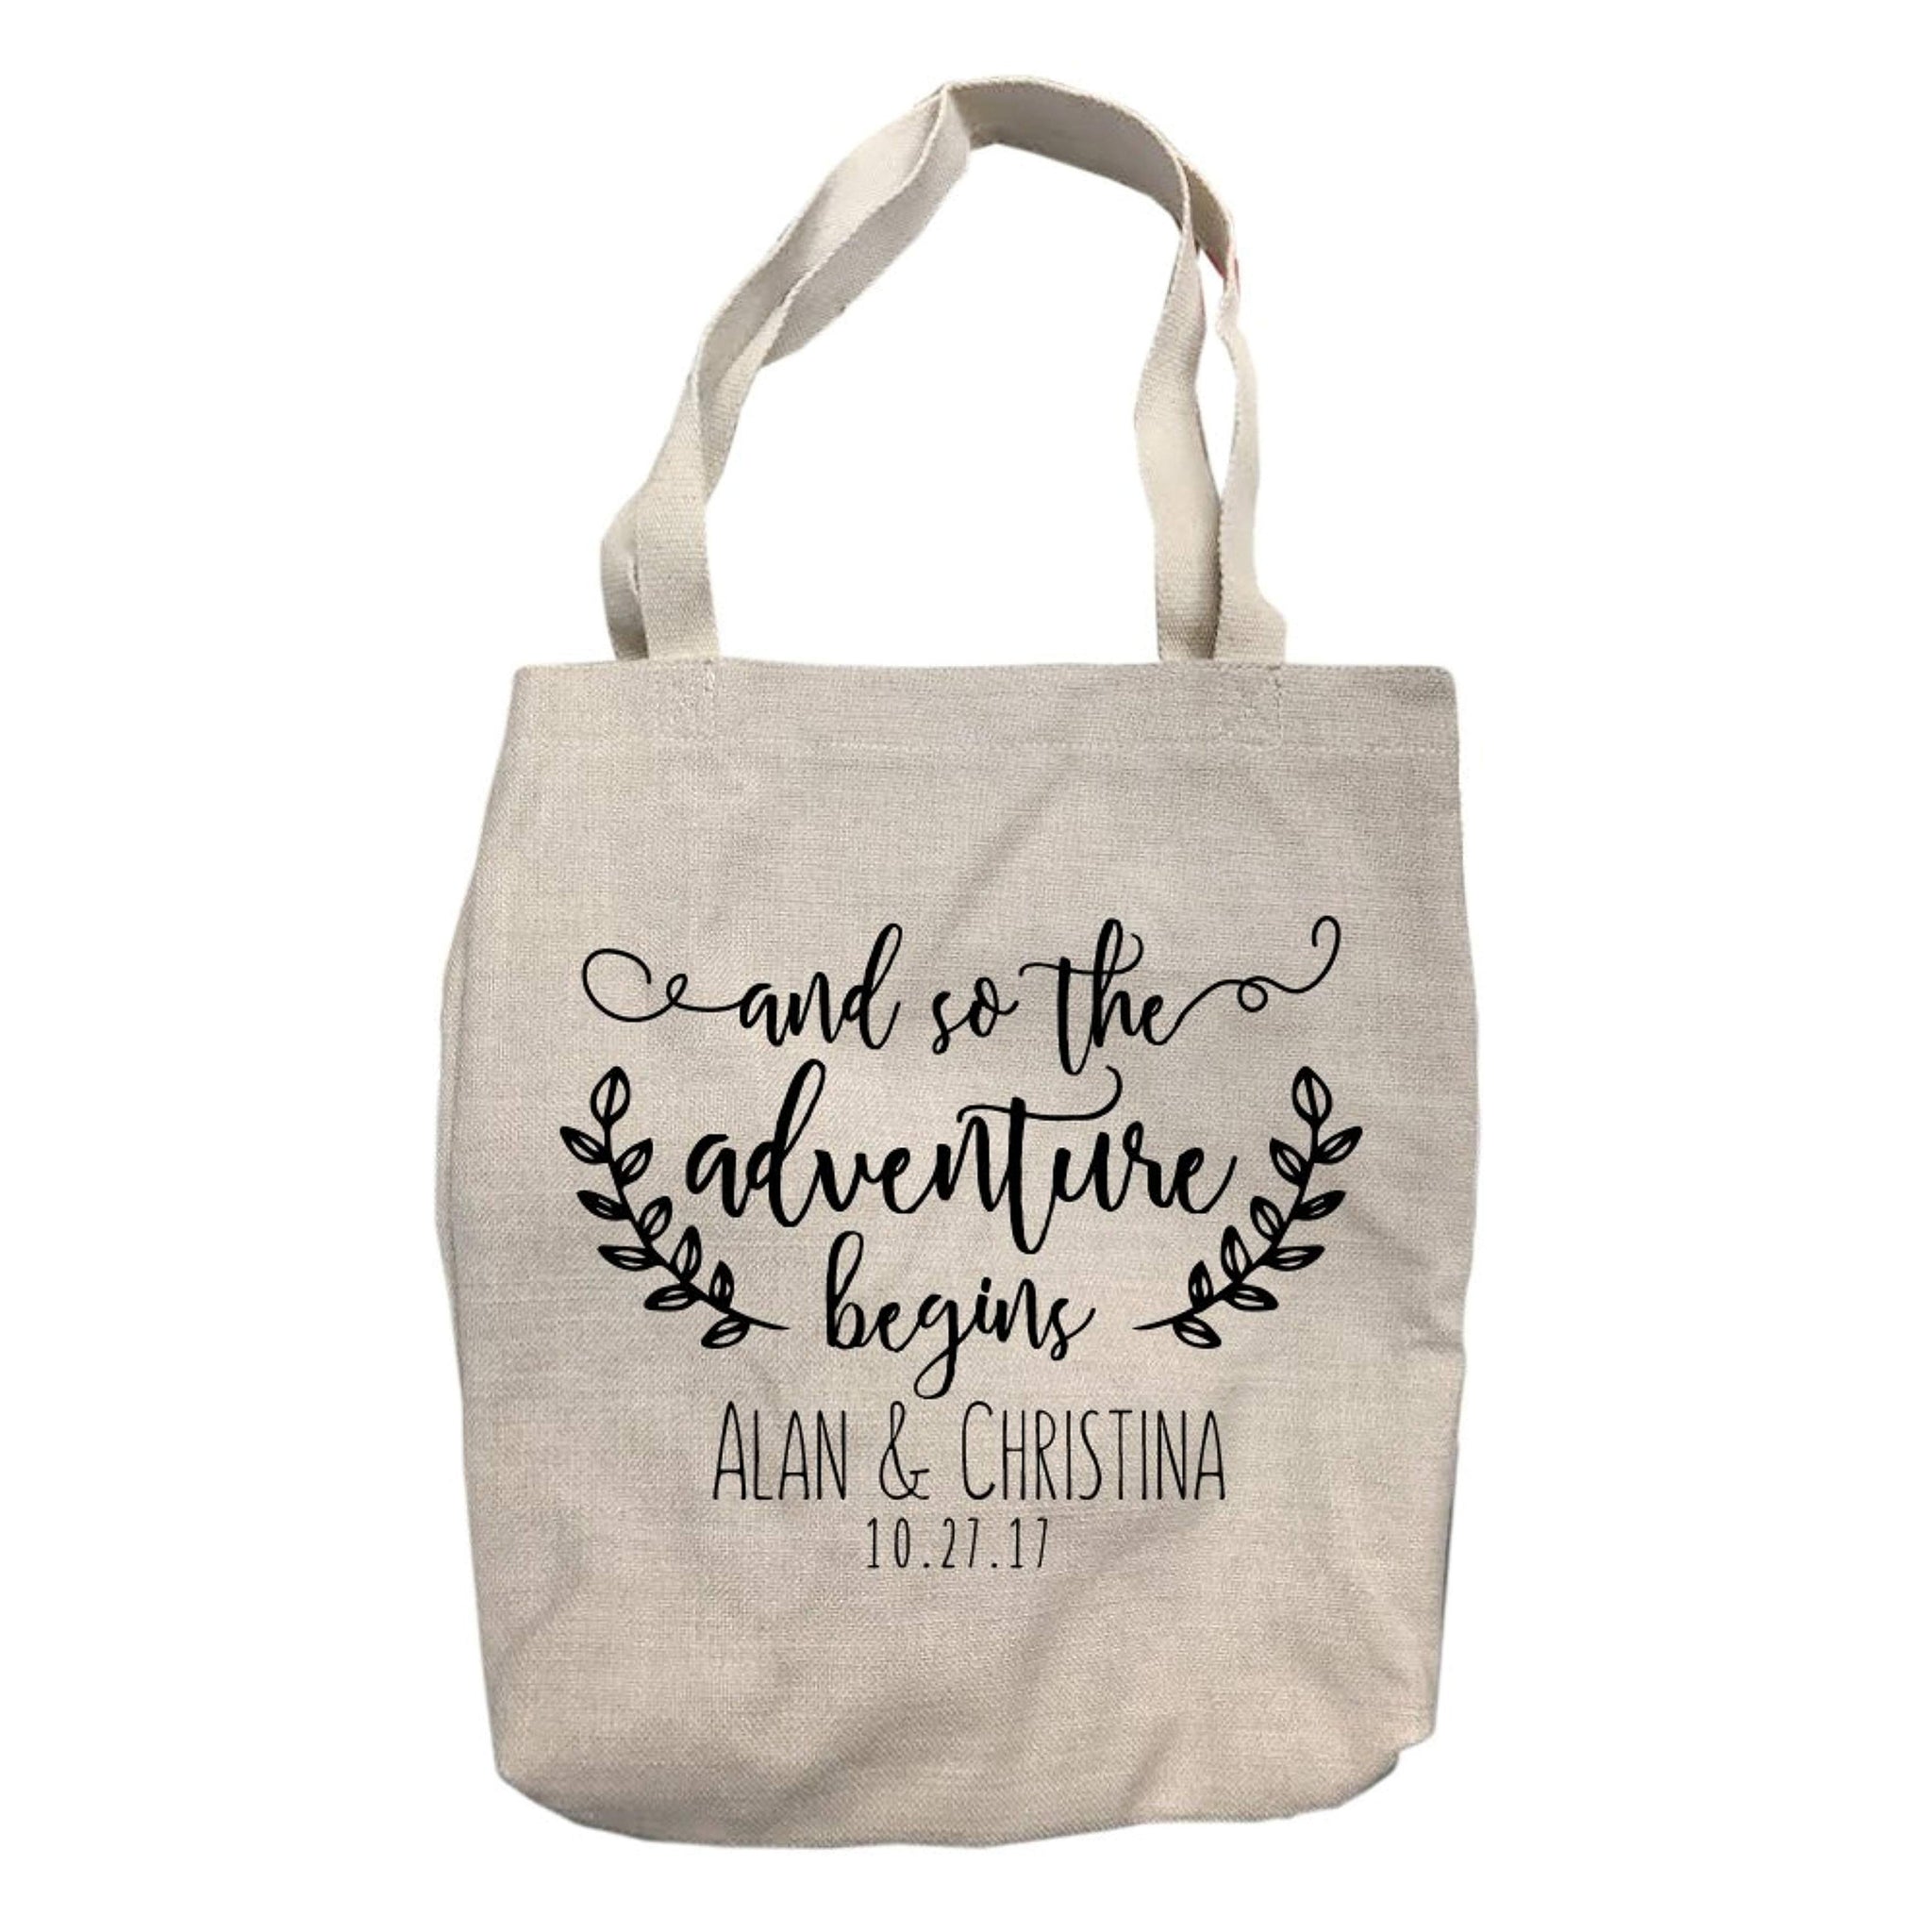 Personalized Wedding Date and Names Tote Bag